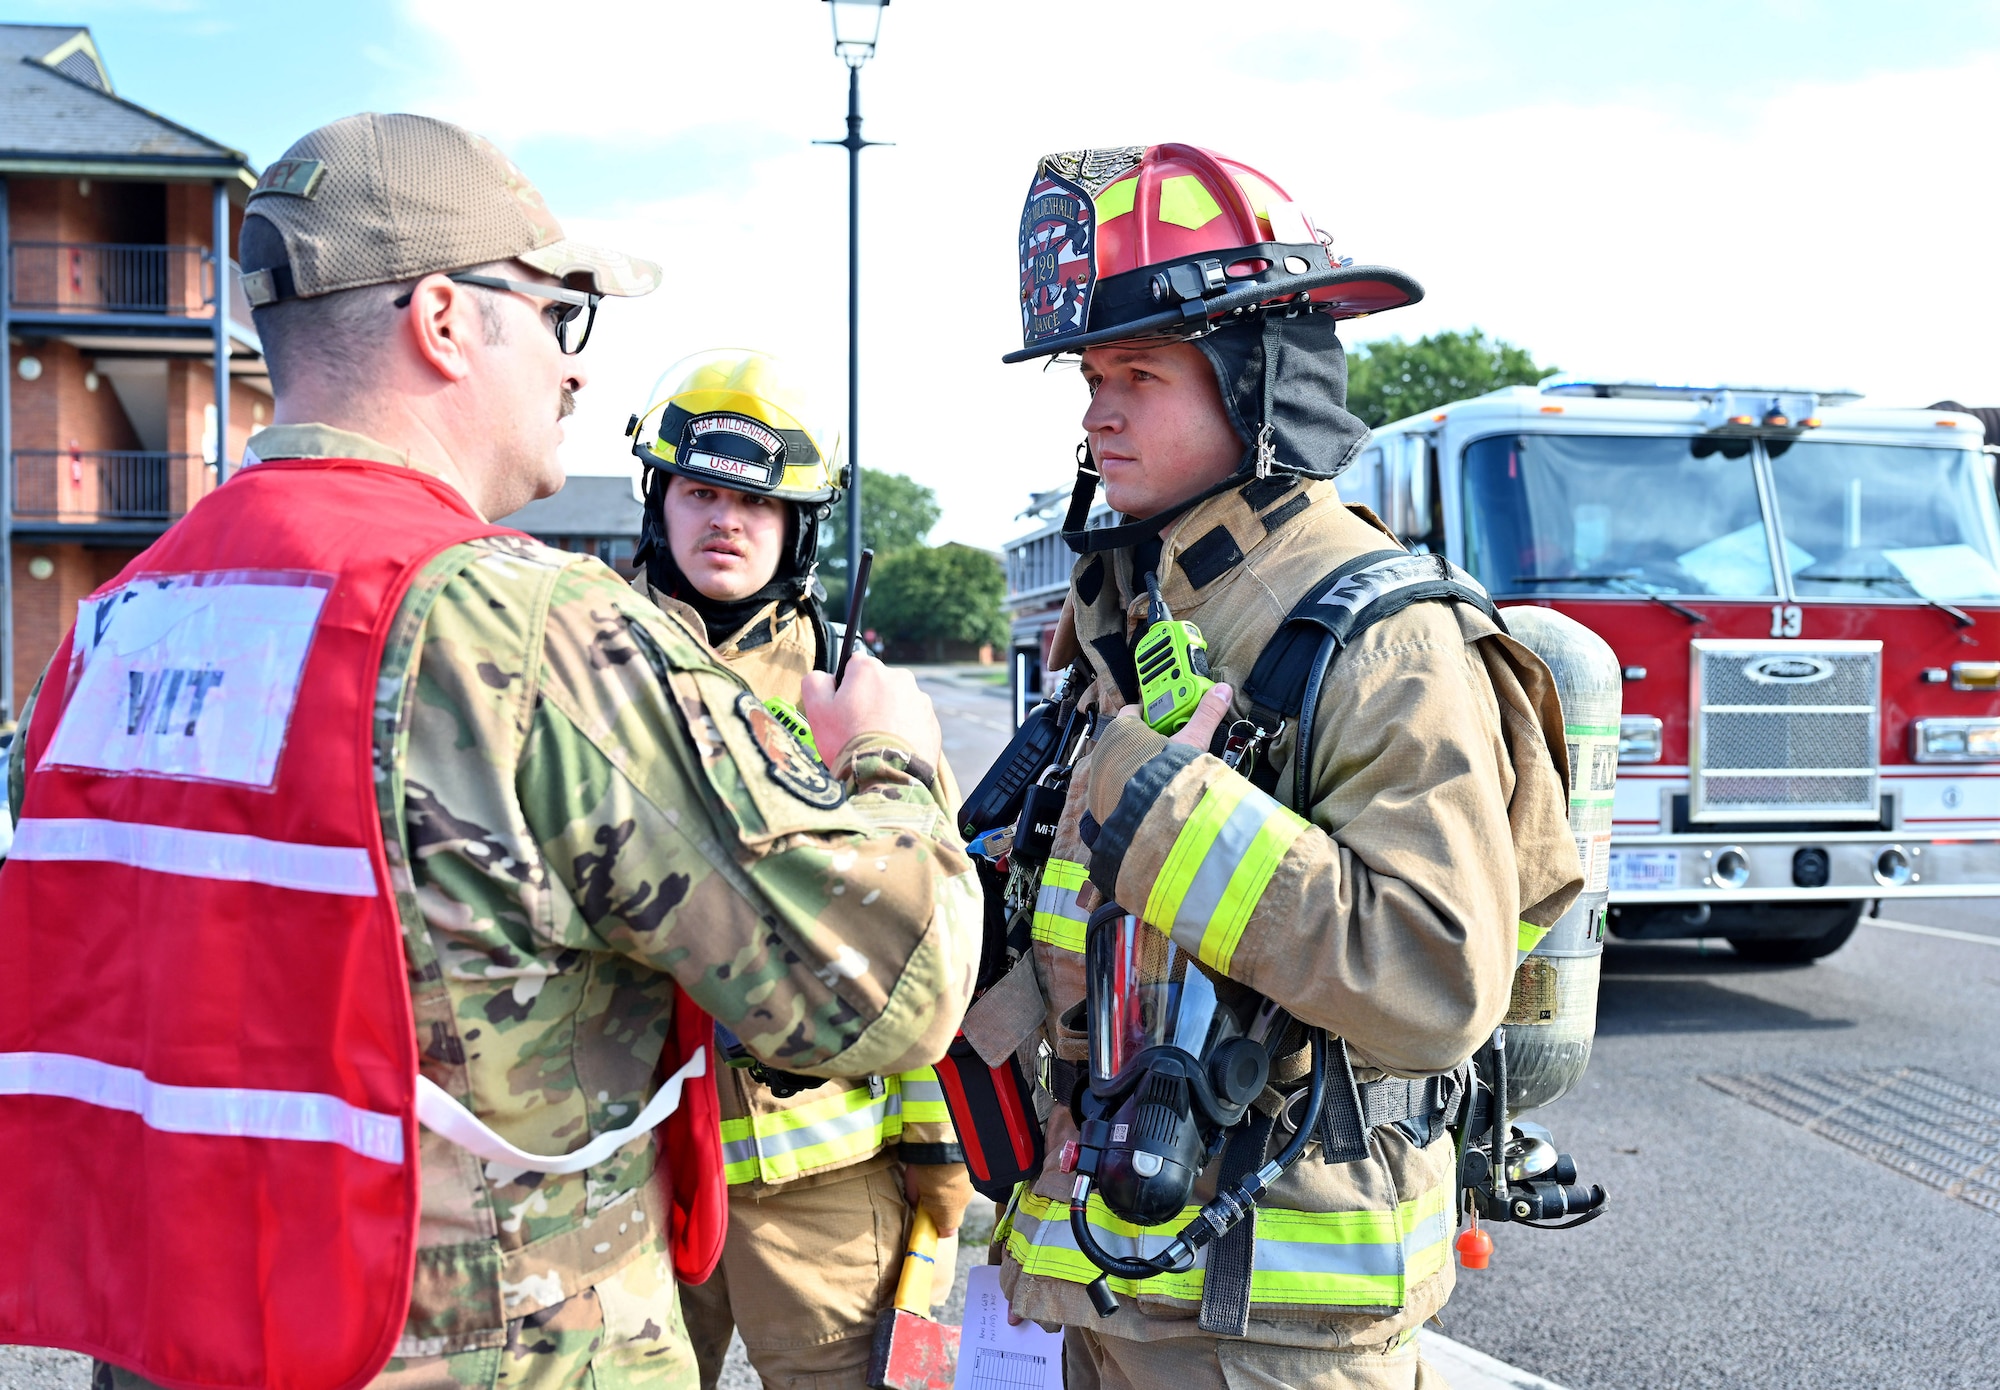 A wing inspection team member assigned to the 100th Air Refueling Wing shares information with 100th Civil Engineer Squadron firefighters during a scenario as part of a natural disaster mass care exercise at Royal Air Force Mildenhall, England, Sept. 21, 2023. The exercise allowed firefighters and 100th Security Forces Squadron defenders to practice performing essential operations during a simulated natural disaster incident. (U.S. Air Force photo by Karen Abeyasekere)